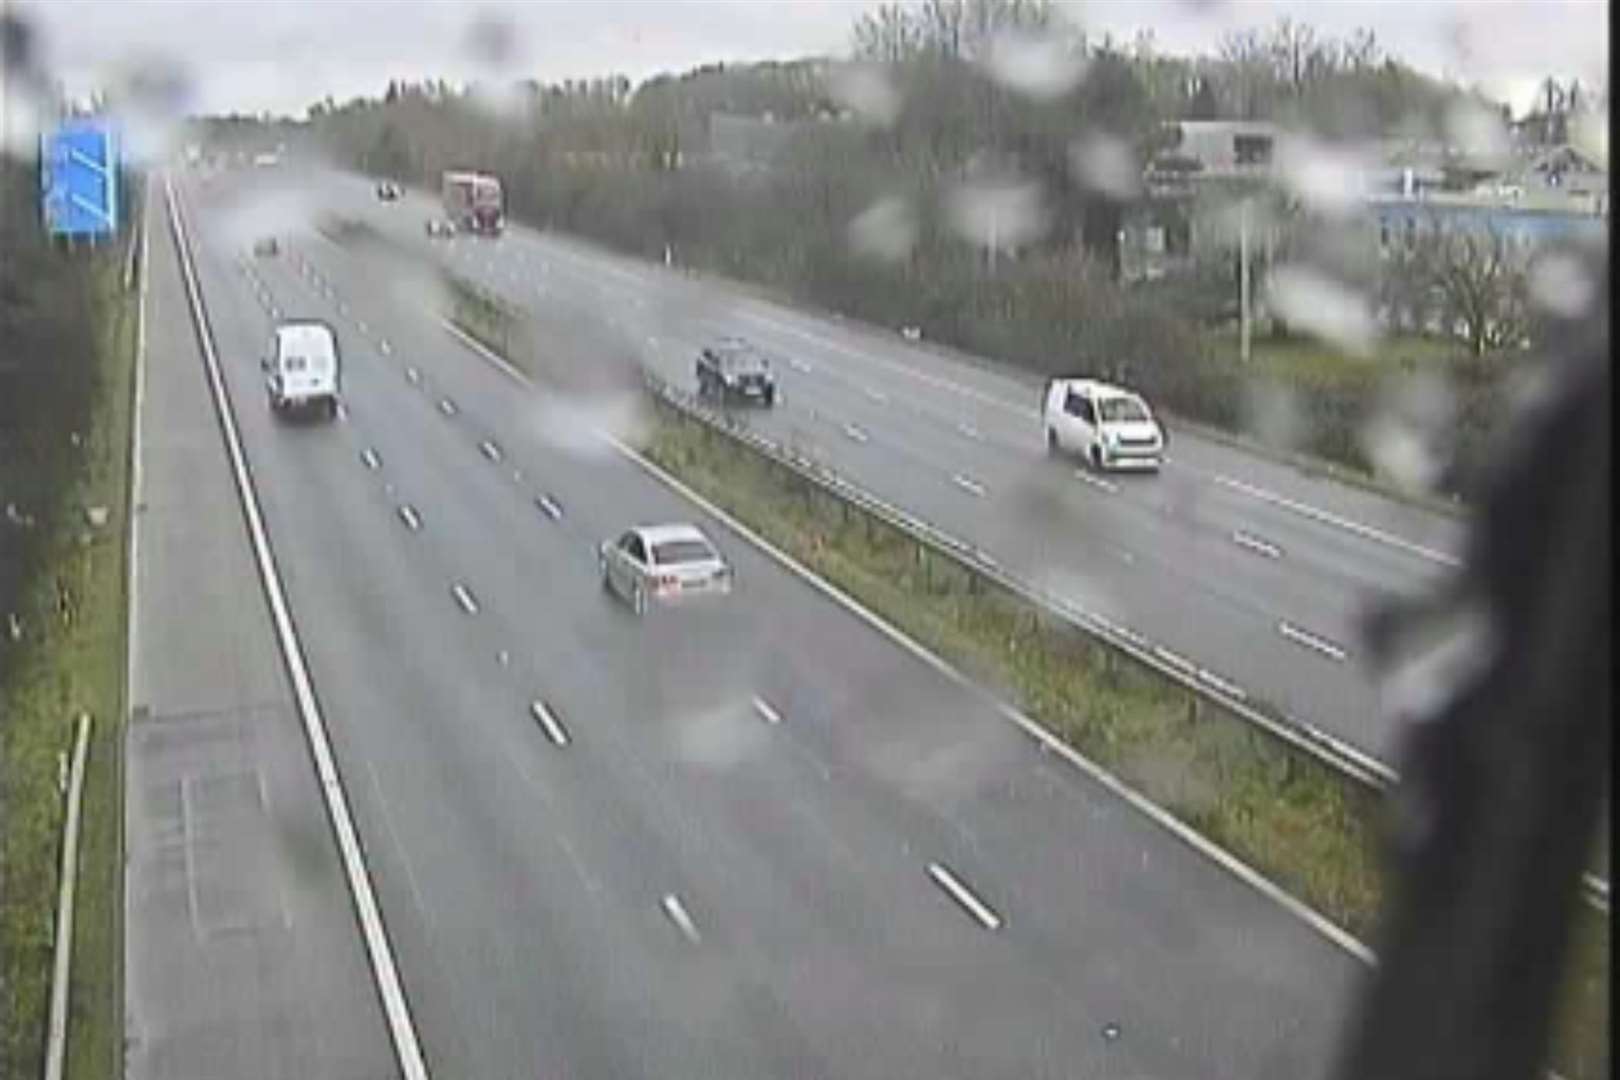 Flooding has been reported on the M20 London-bound near Ashford. Photo: National Highways (61532754)